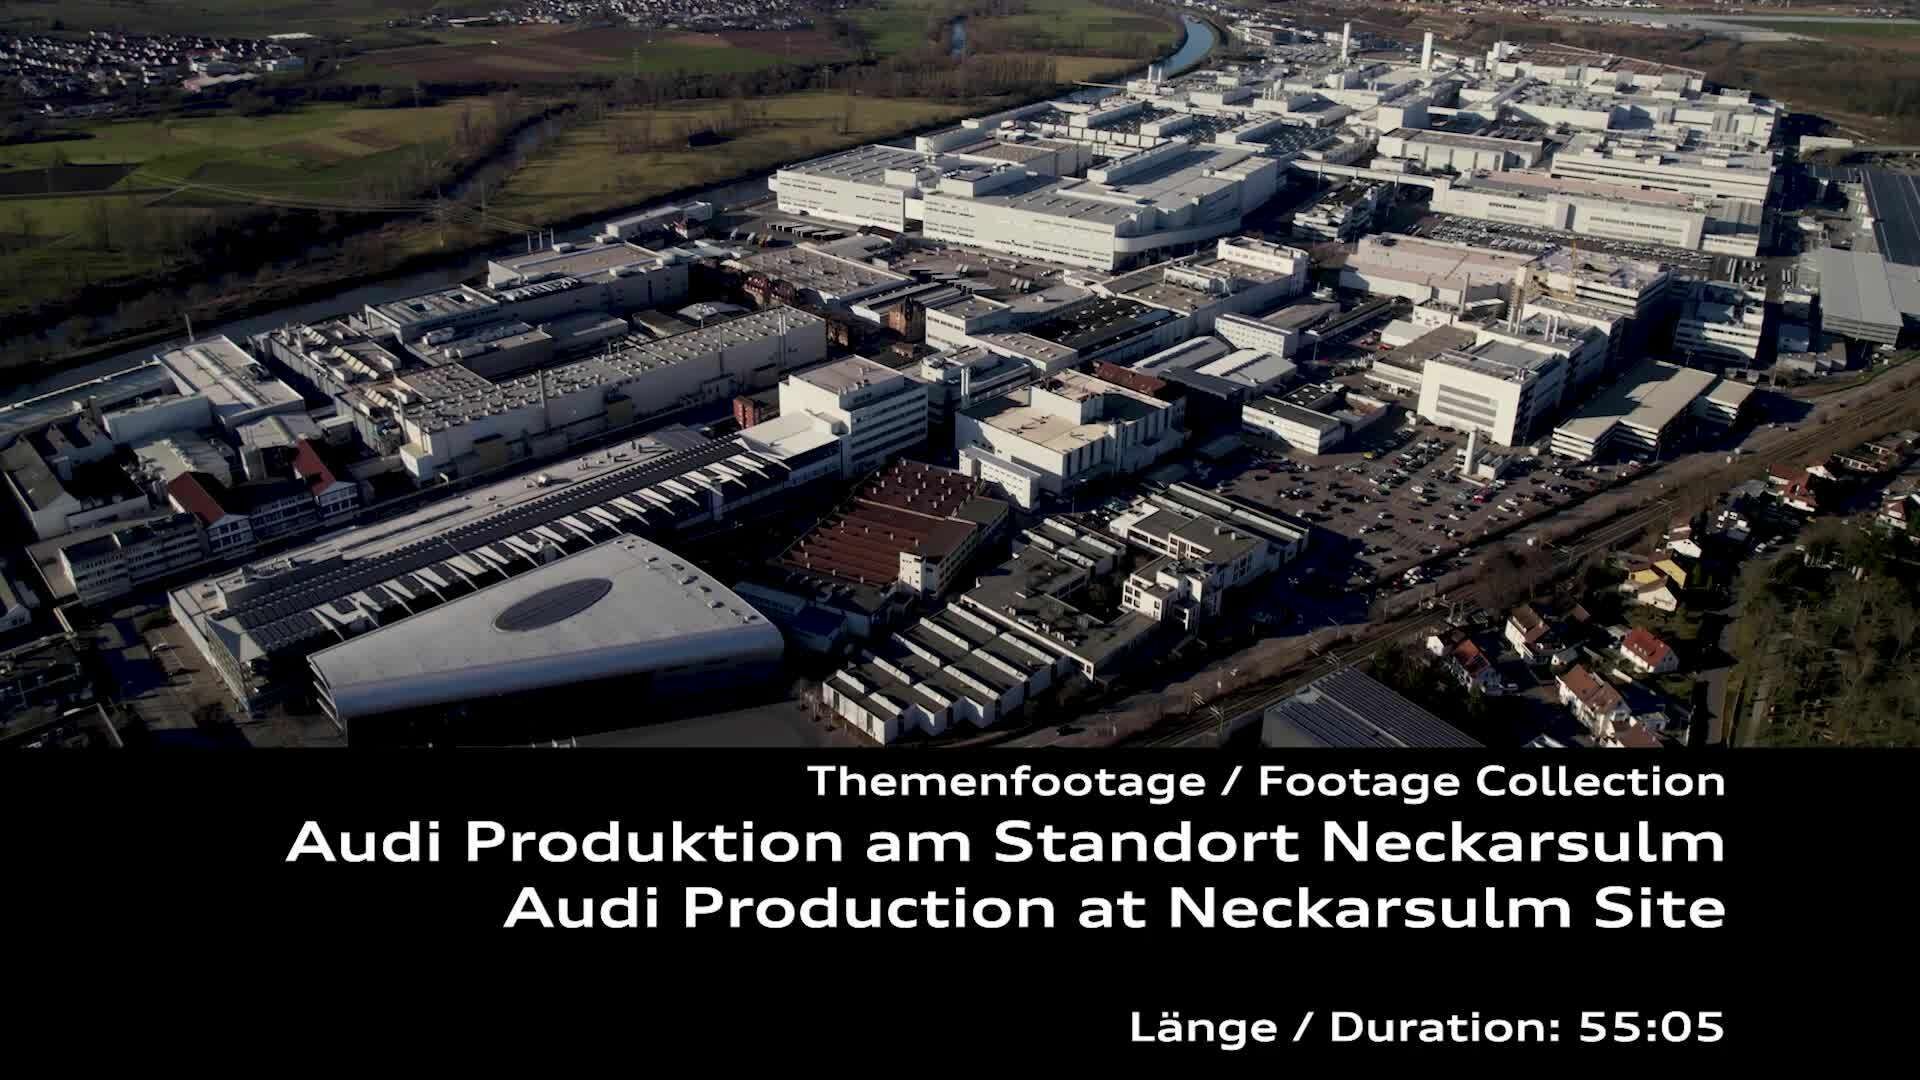 Footage: Audi Production at Neckarsulm Site